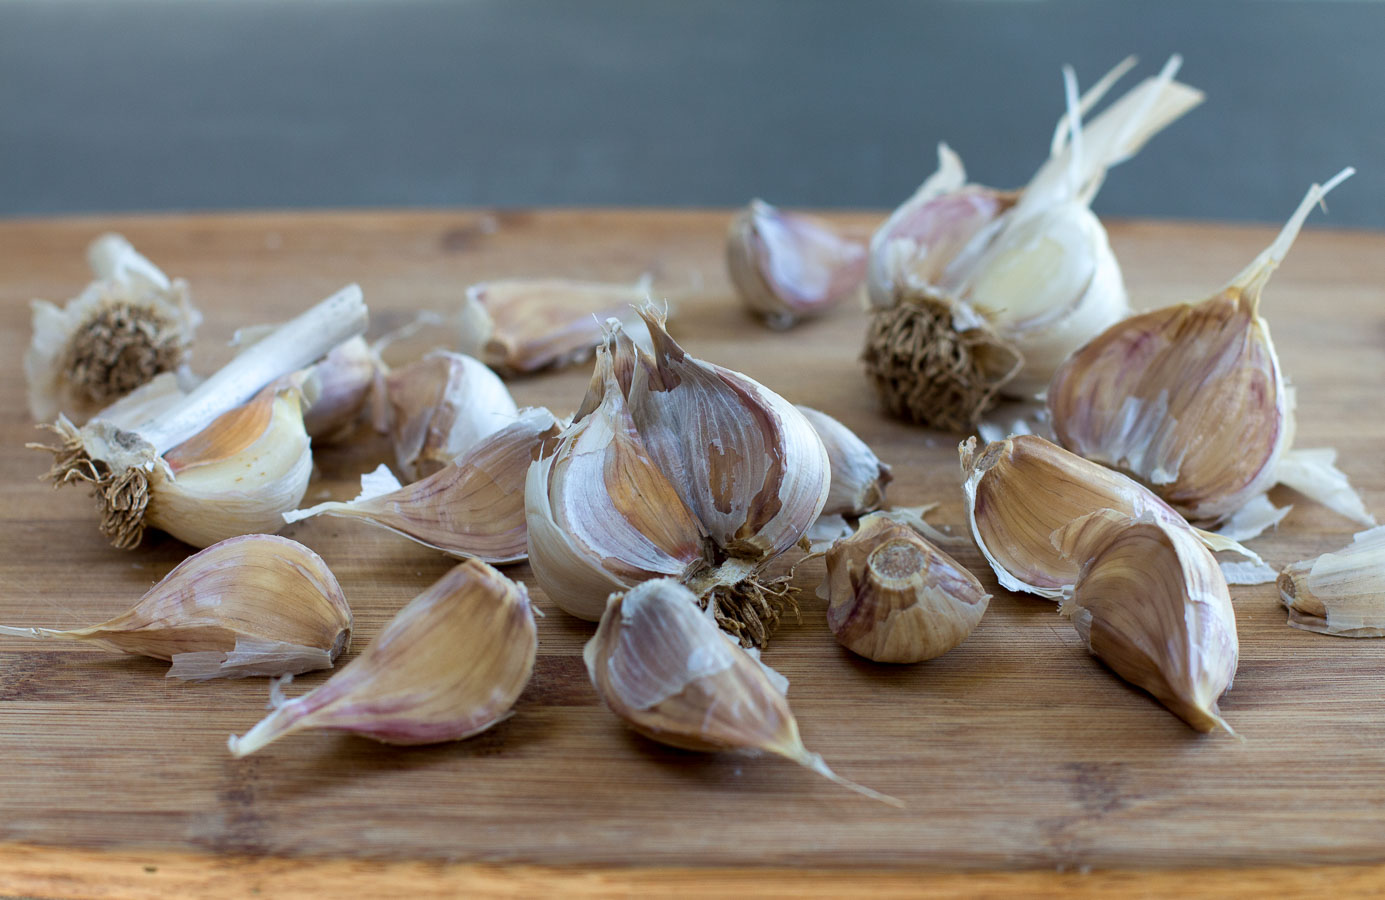 Separate the cloves from four heads of garlic